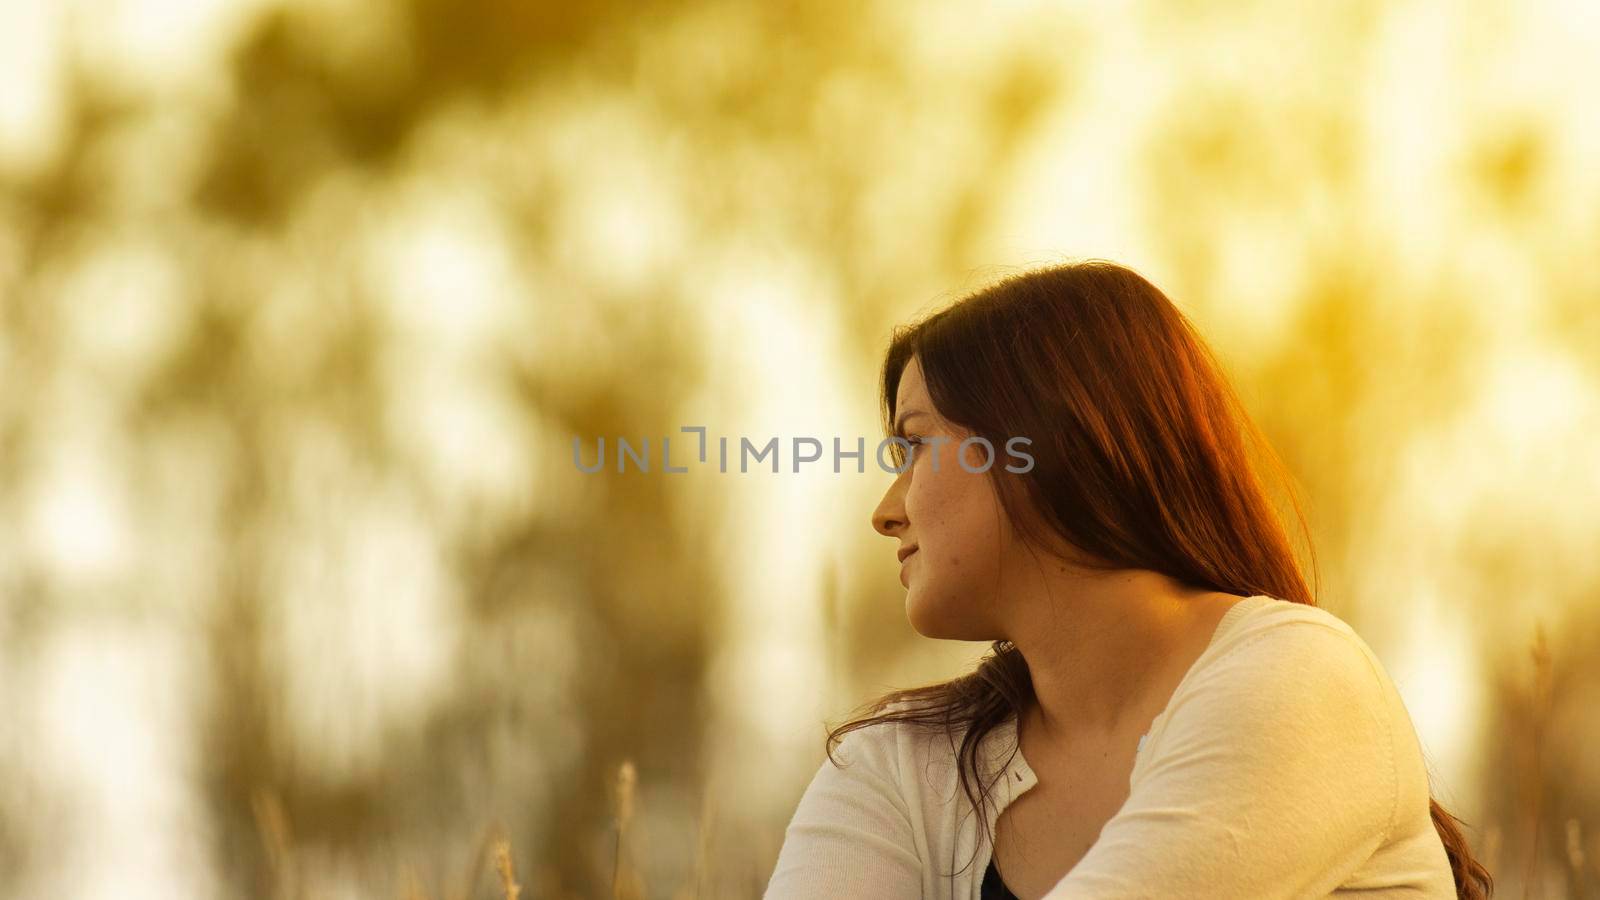 Portrait of beautiful Hispanic young woman with long hair looking to the right against a background of unfocused trees during sunset by alejomiranda